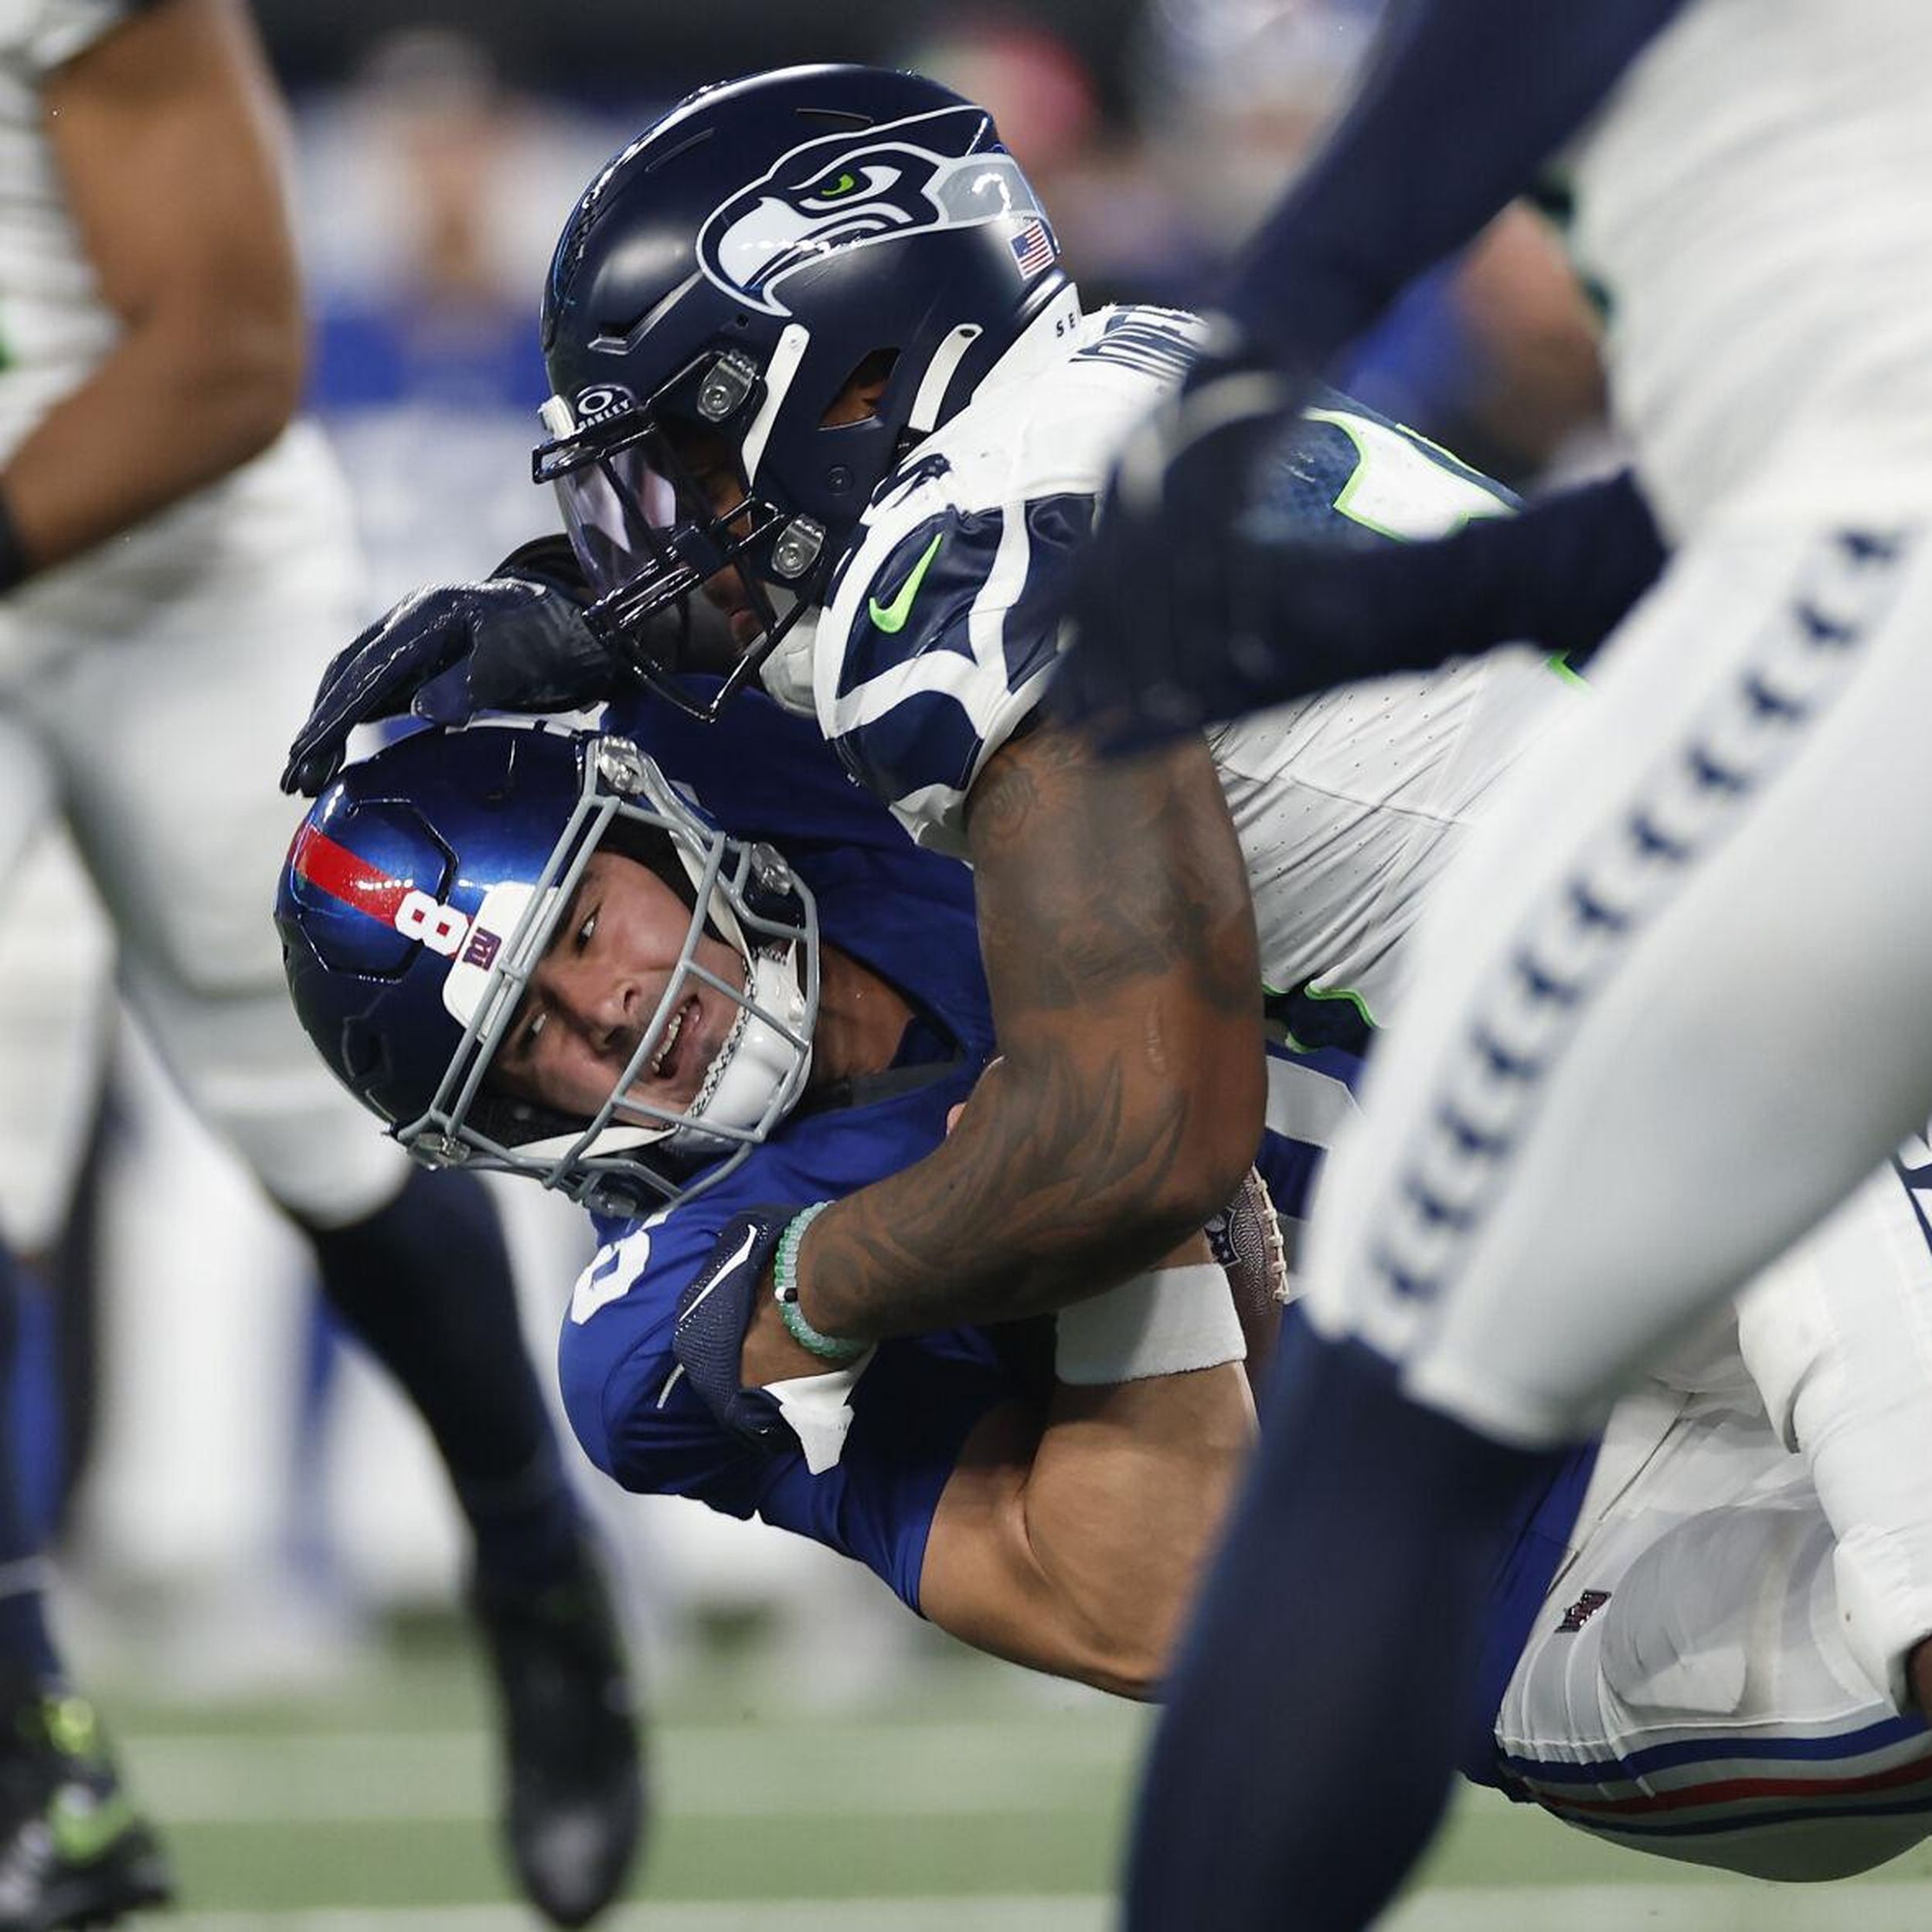 Seahawks defense feasts on Giants in dominant 'Monday Night Football' win